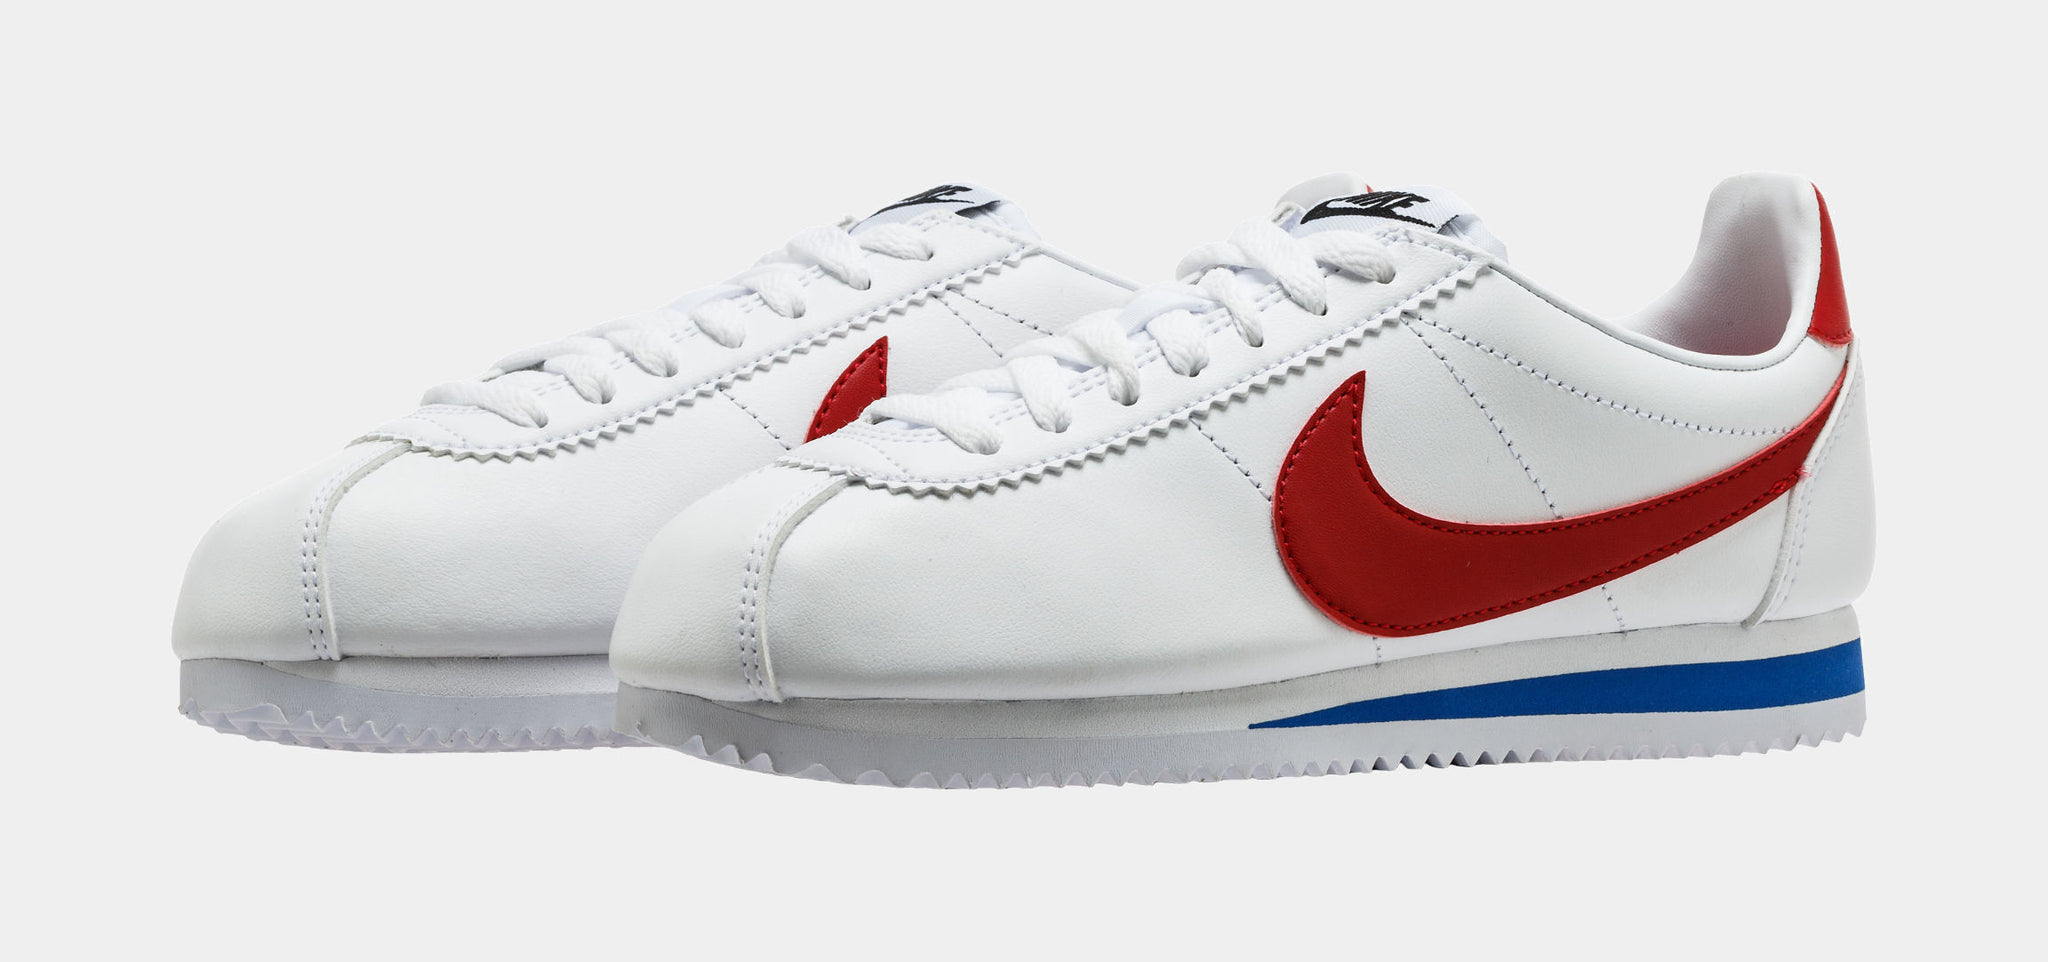 Nike Classic Cortez Leather Low Womens Lifestyle Shoes White Red Blue 807471-103 – Palace